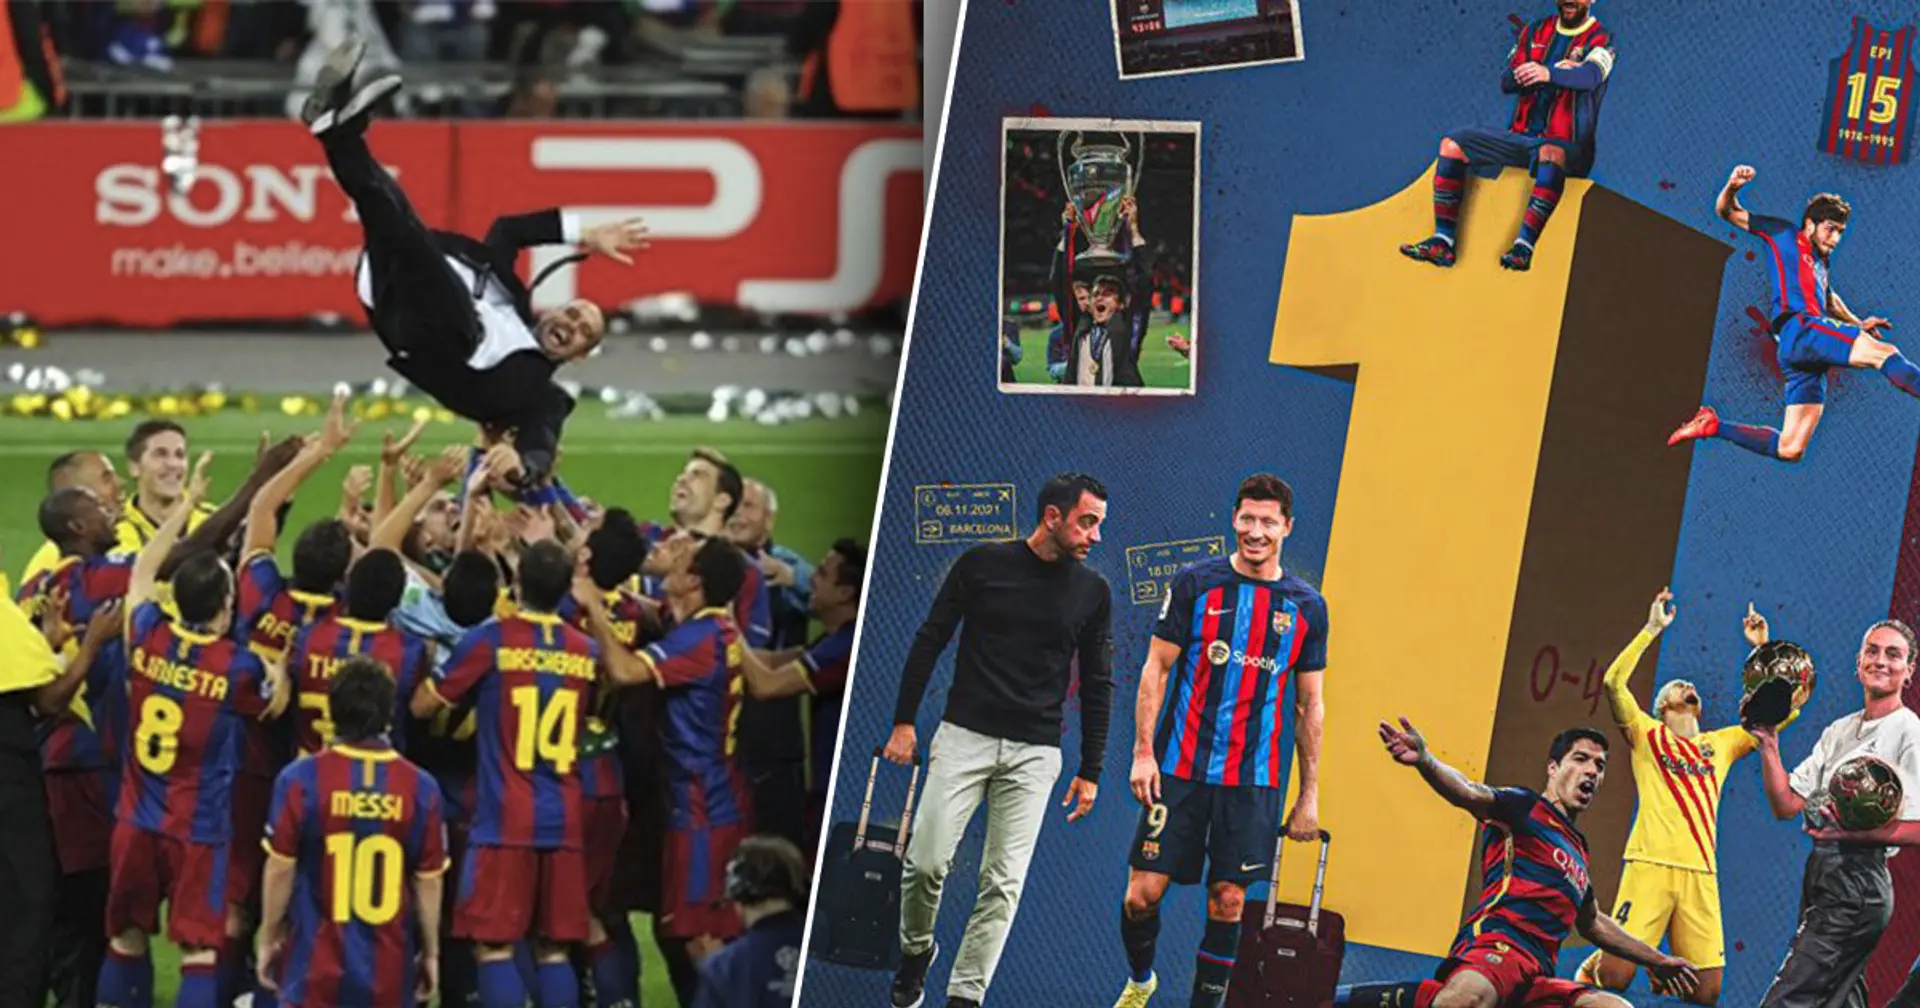 It's FC Barcelona's birthday! 23 remarkable moments they display in new artwork